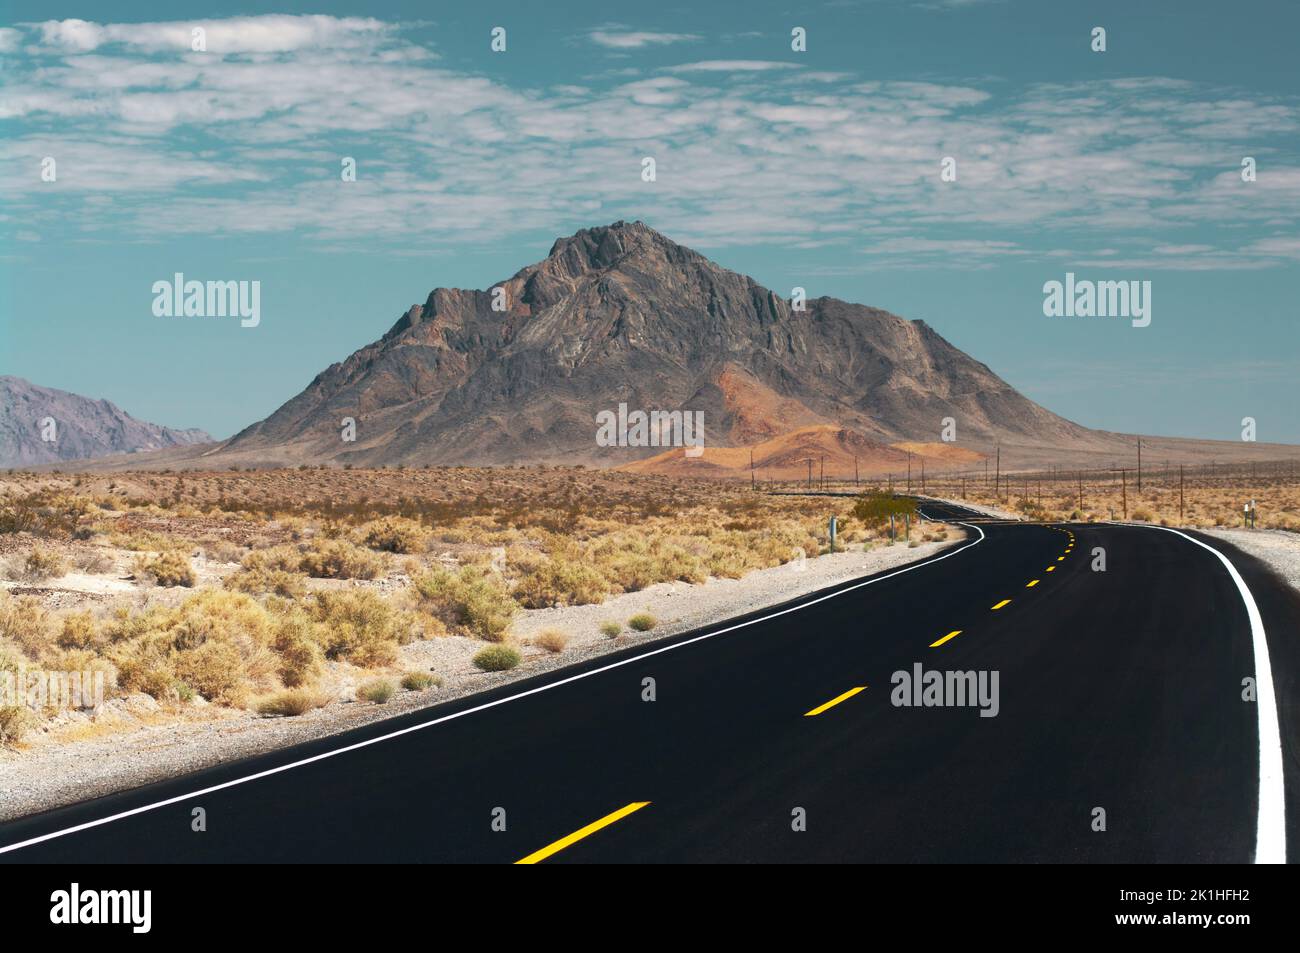 Highway 127 in the Mojave Desert near Death Valley, looking north, showing Eagle Mountain in the background. Stock Photo